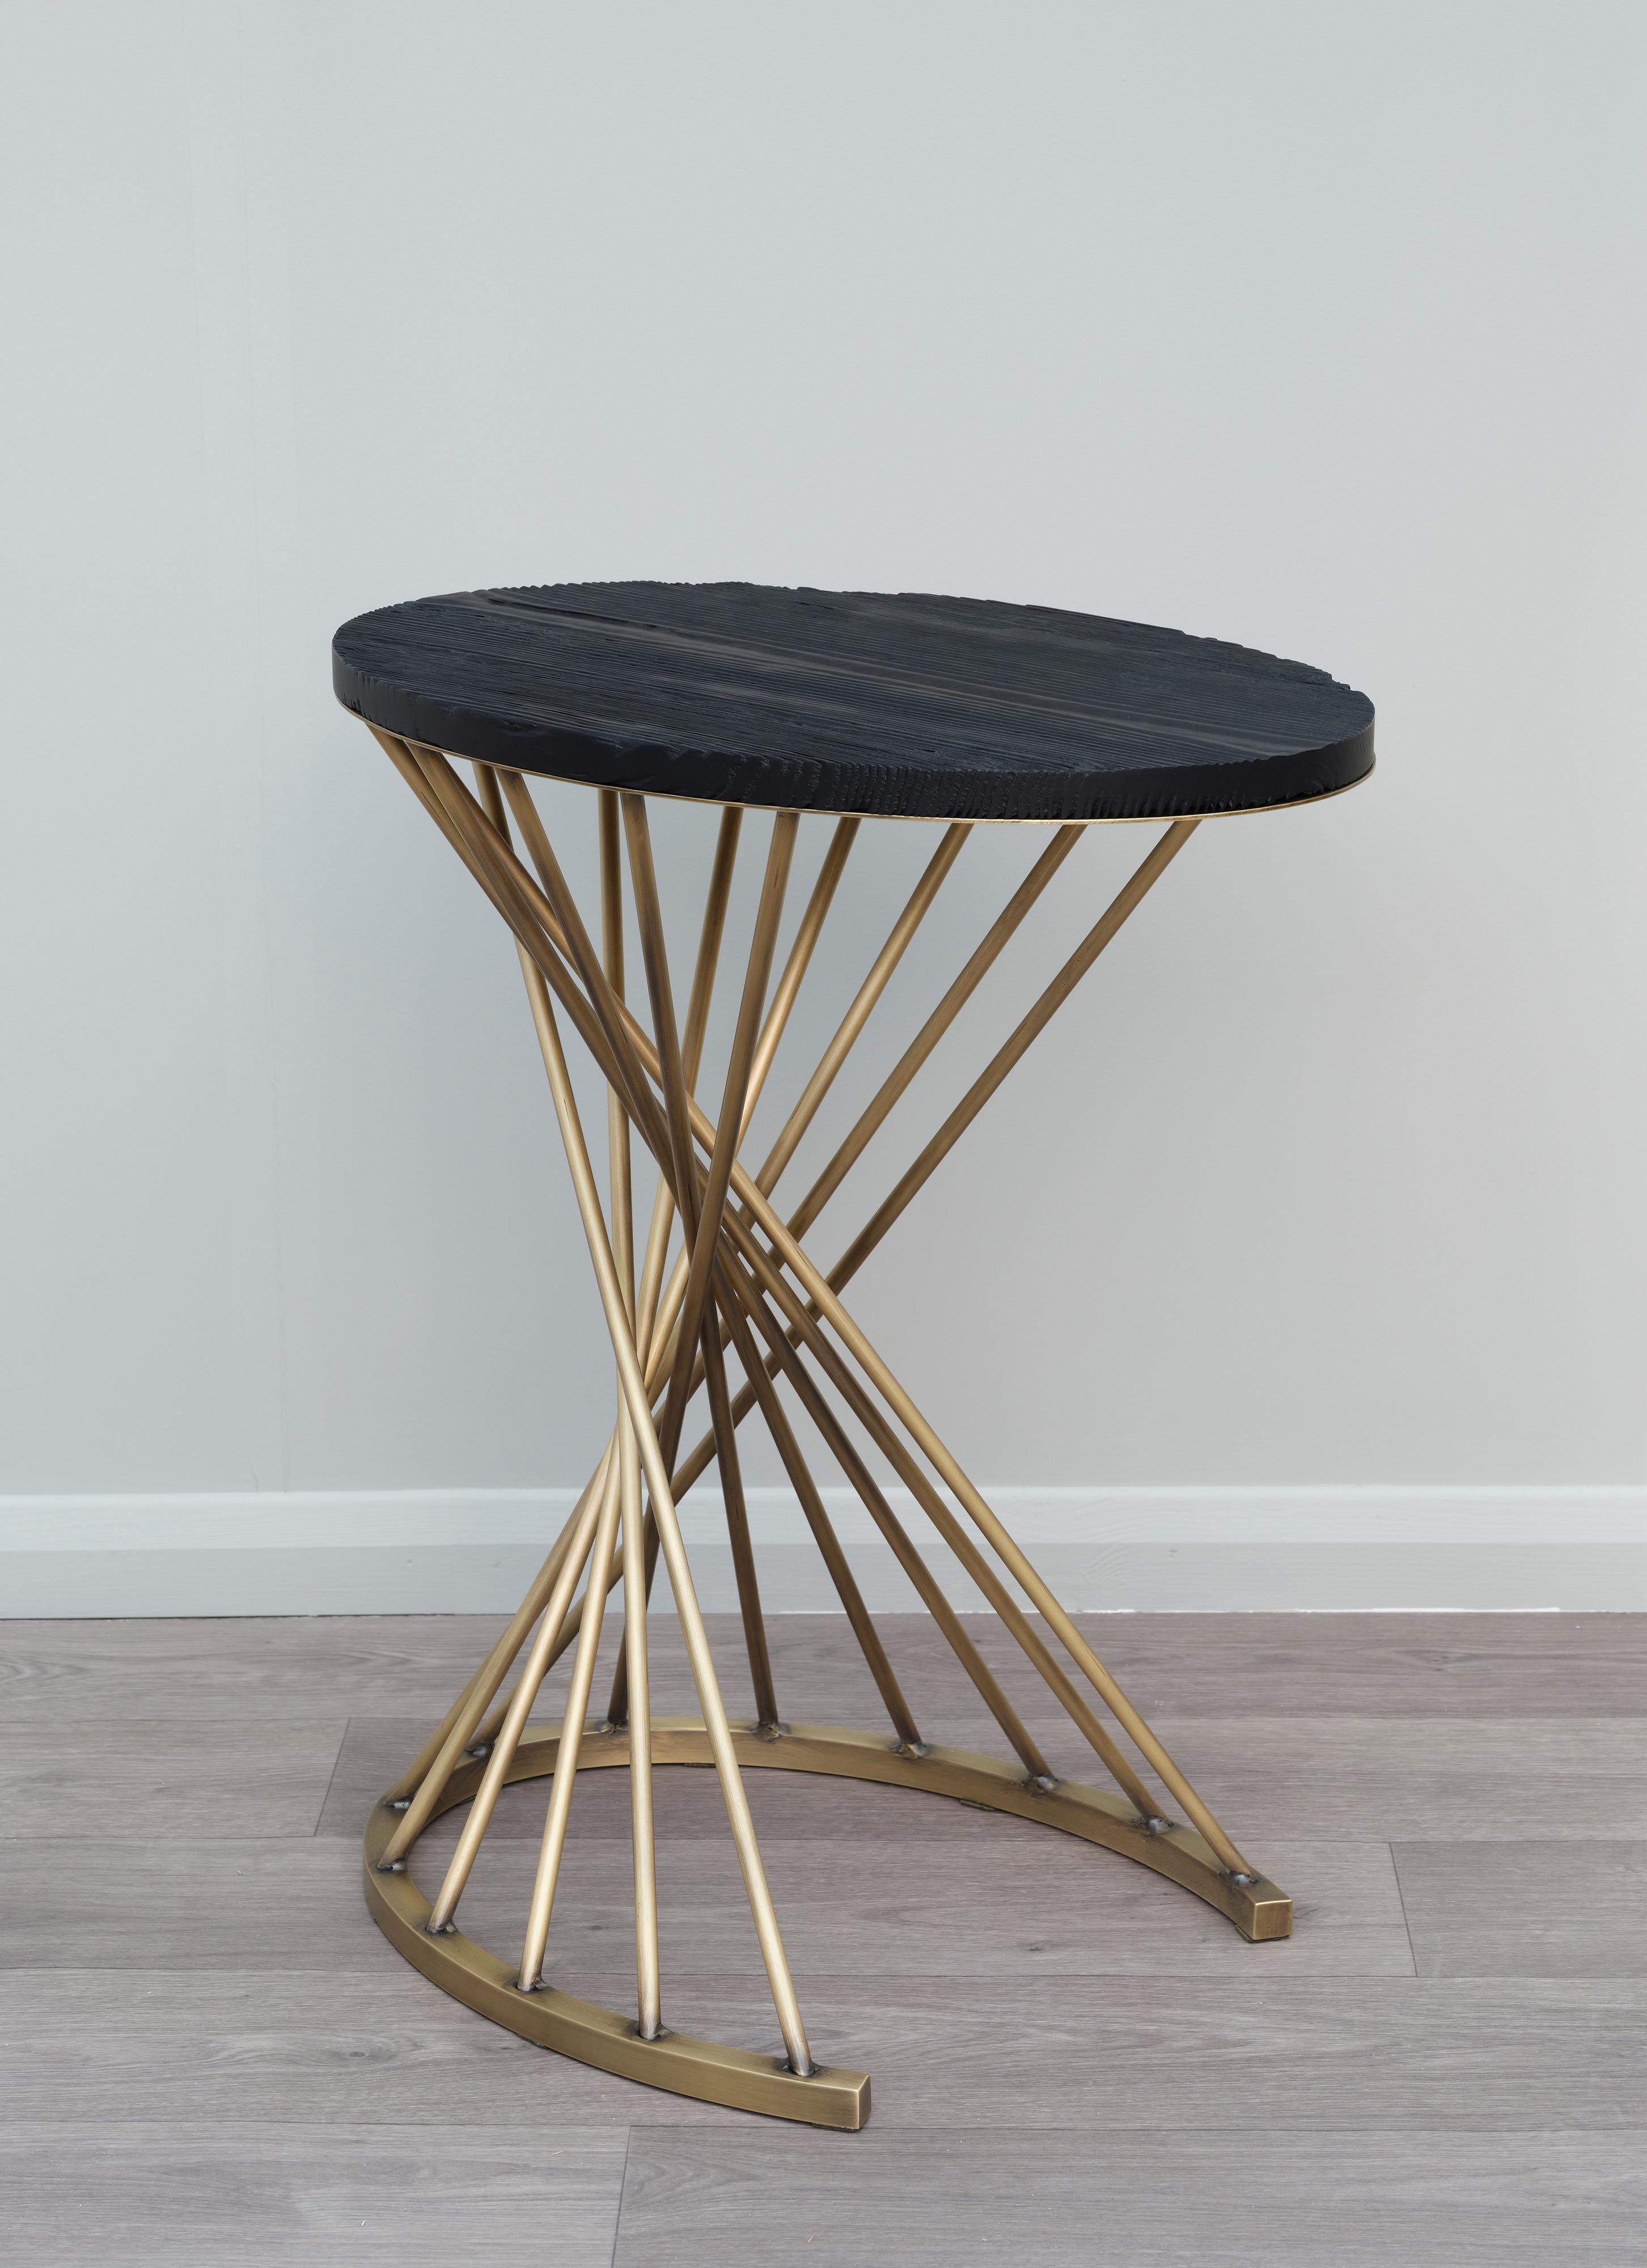 Contemporary Handcrafted Side Table in Brass and Wood.

Outrenoir Orpheus side table is an intricate piece with top in darkened pine wood and supported by patinated brass legs forming a helix. 

The shape and the title of this work, which references